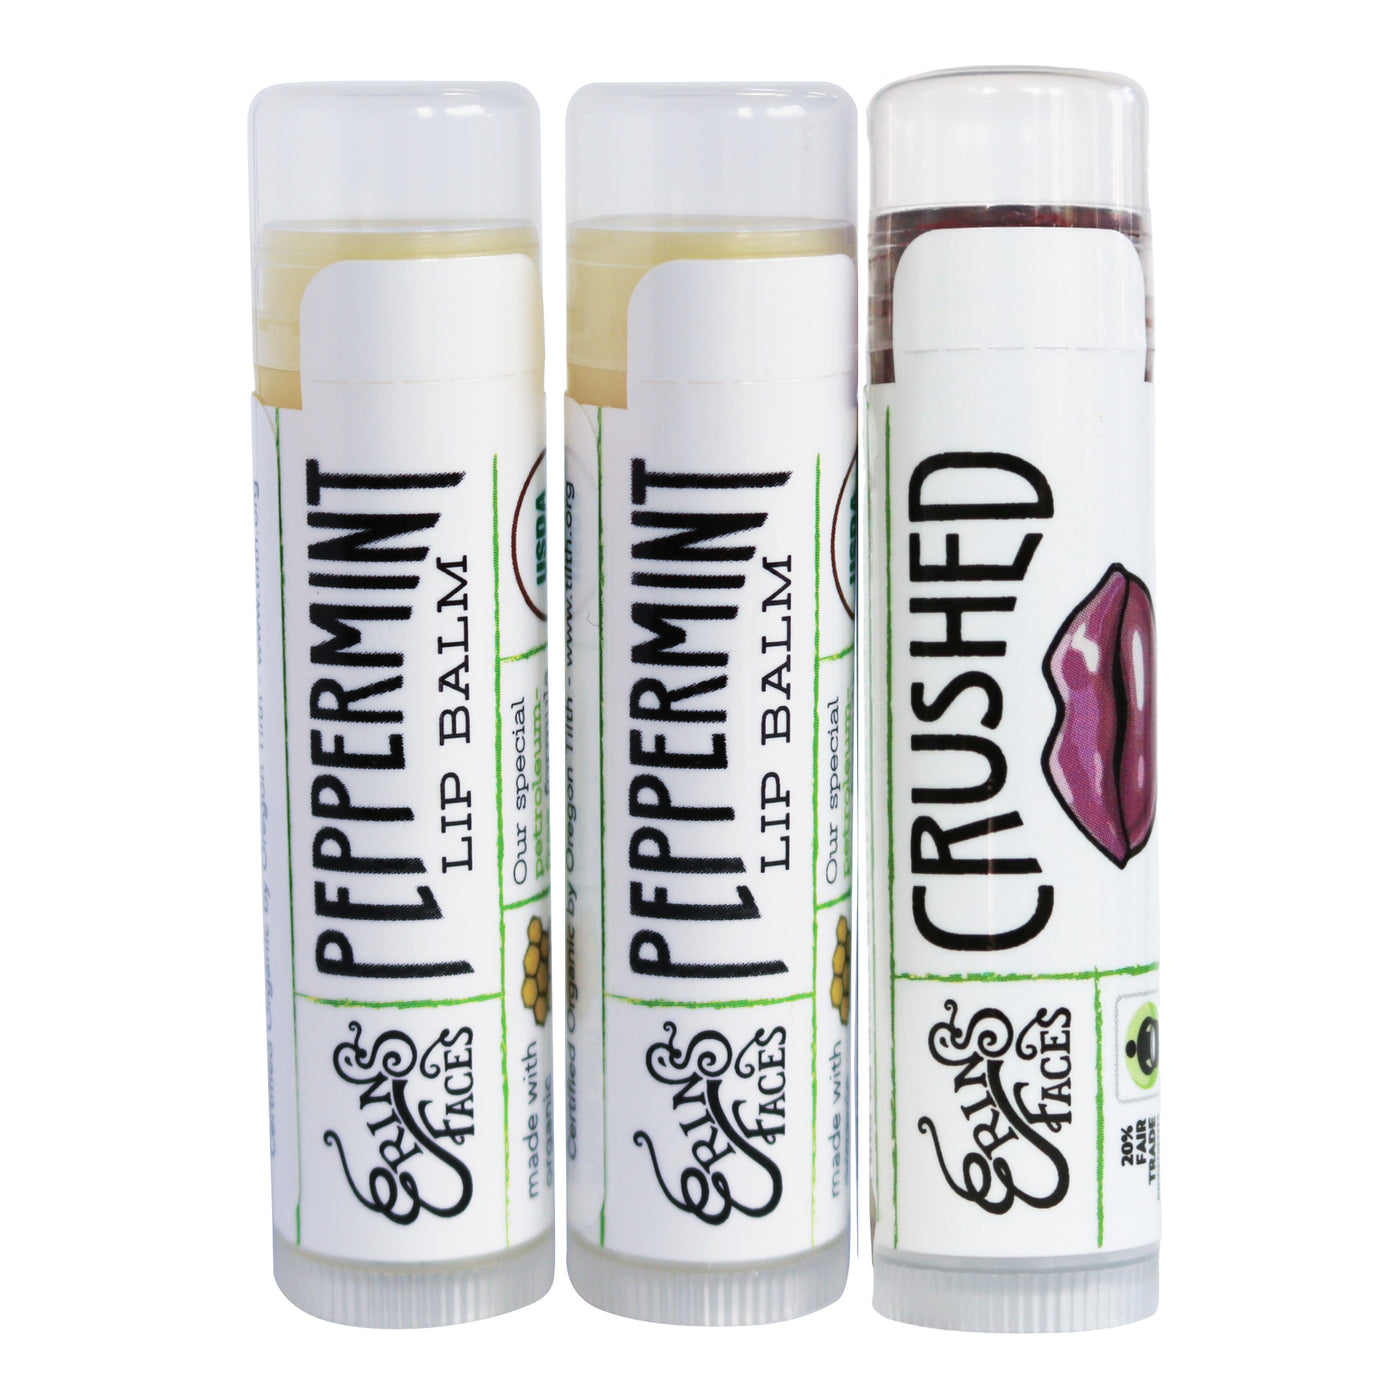 two peppermint lip balms - clear - and one tinted lip balm in crushed with mauve lips on the tube